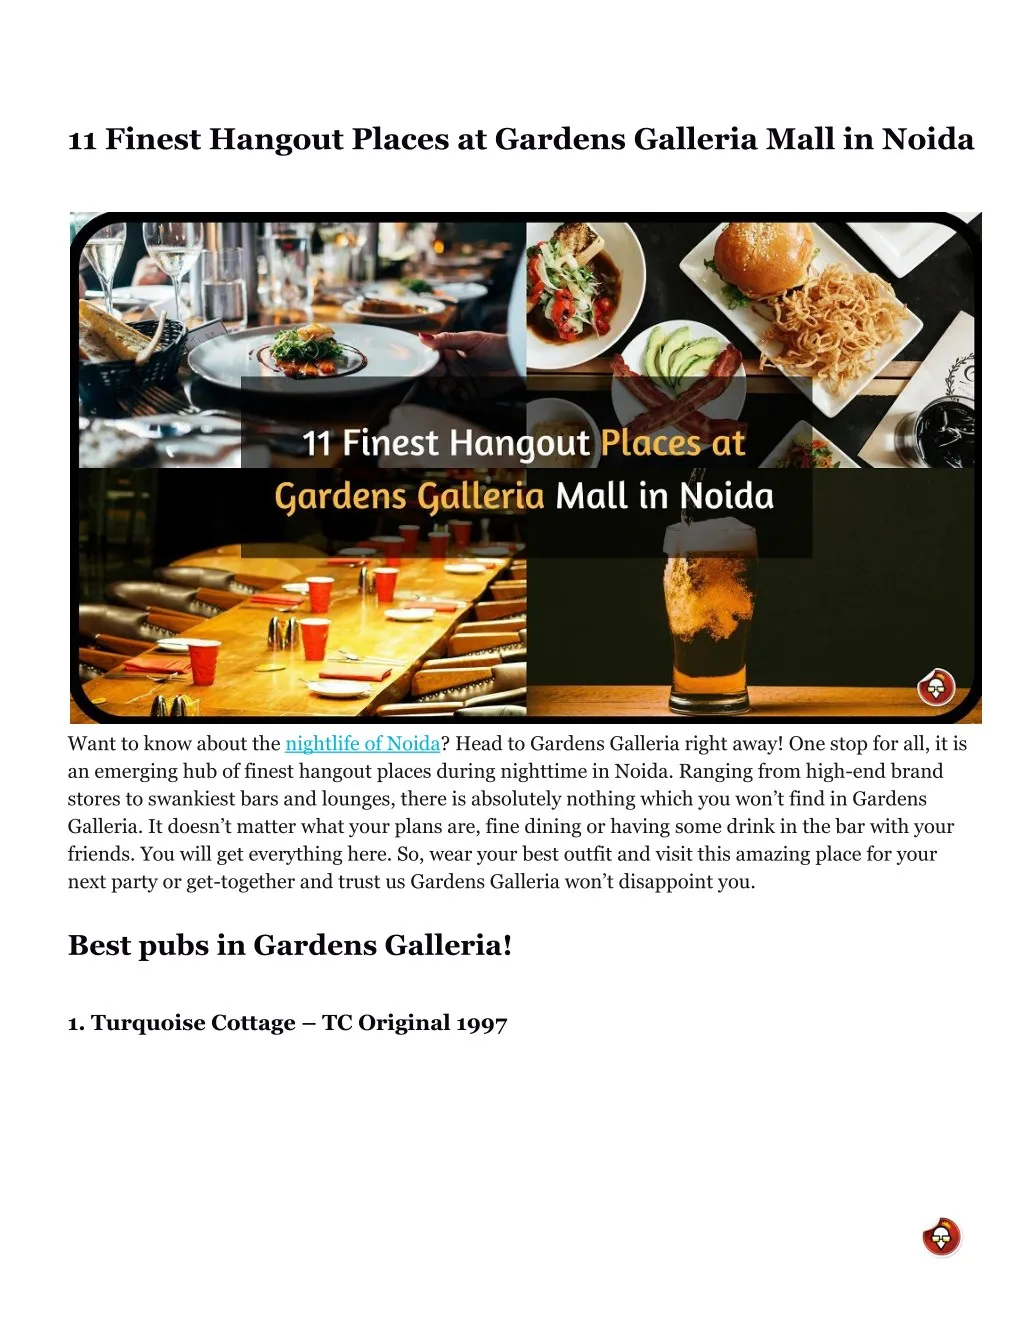 11 finest hangout places at gardens galleria mall